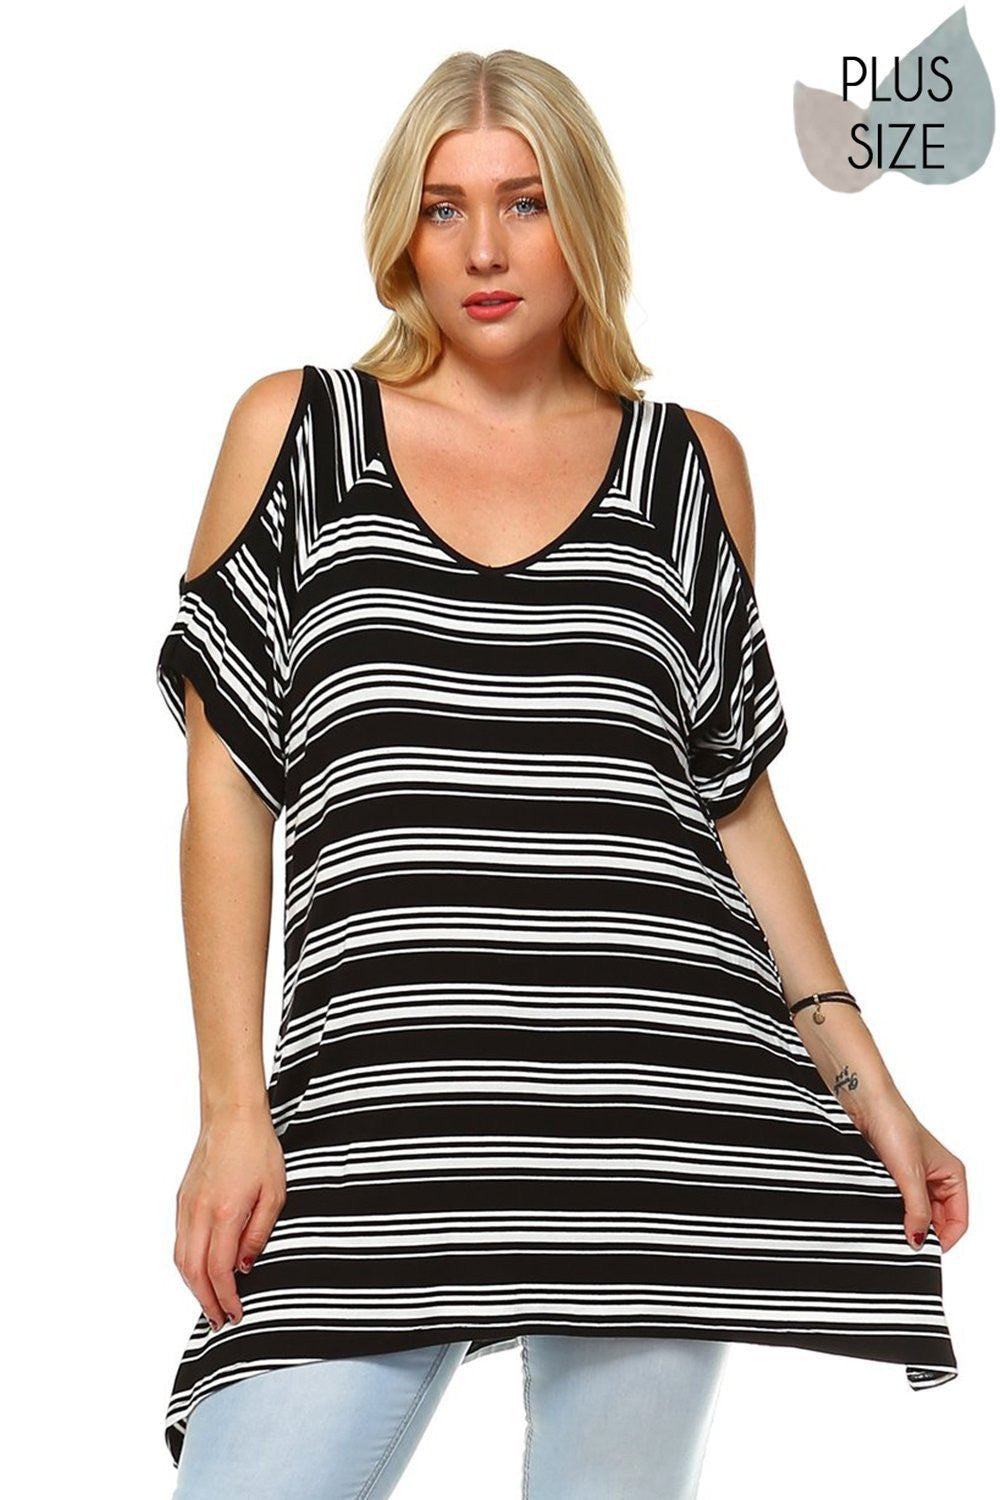 Black&White Plus Size Striped V-neck 3/4 sleeve top and cold shoulder cutouts Perfect for Spring & Summer, Evening wear, Festival, Beach Day, Vacation, Dance, Poolside Parties